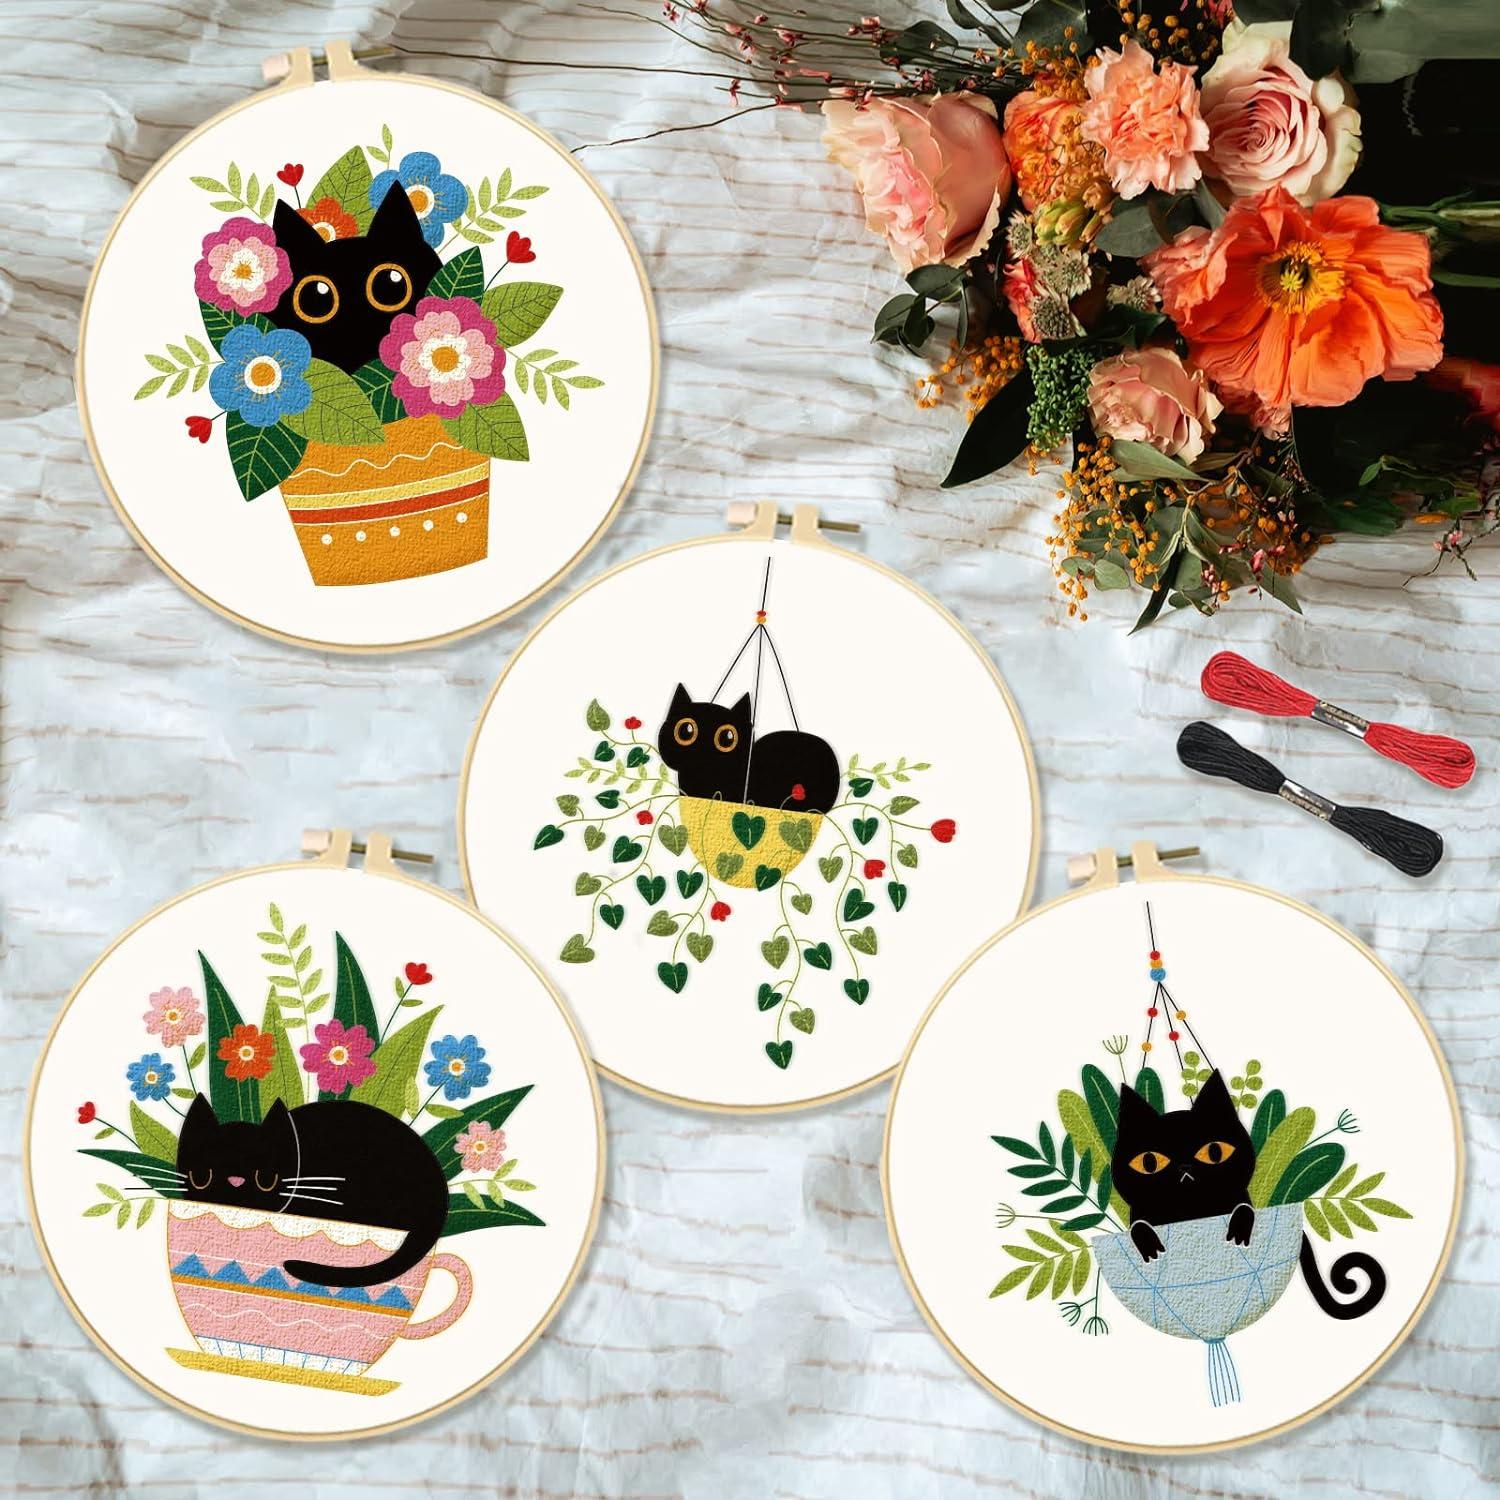 15pcs Cross Stitch Accessories Kit Embroidery Kits for Embroidery